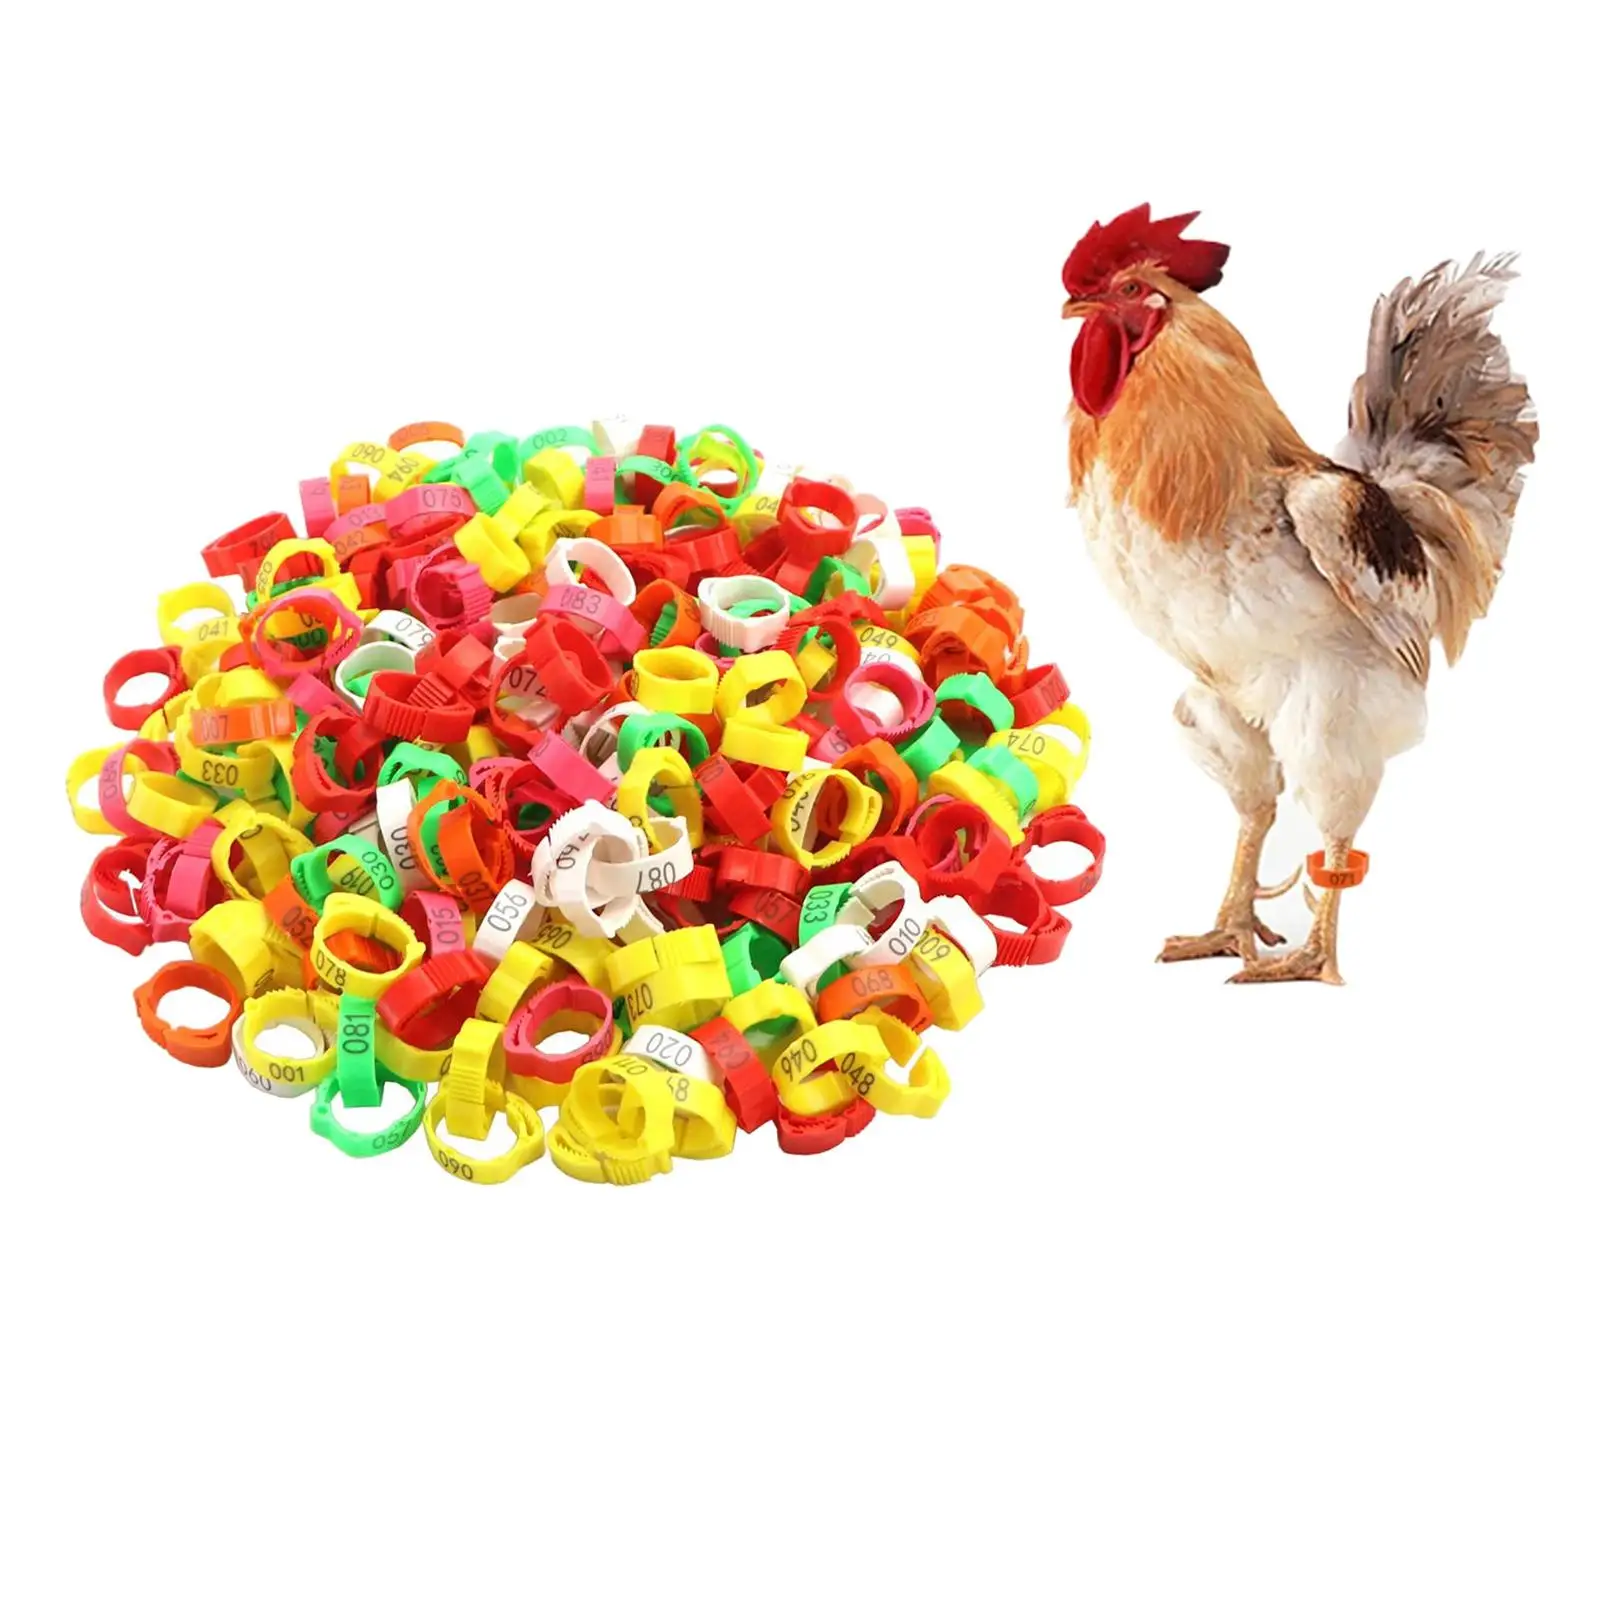 100x Poultry Foot Bands Adjustable Buckle Clip Ring Foot Label Rings Chicken Leg Rings for Chickens Ducks Pigeon Goose Bantam